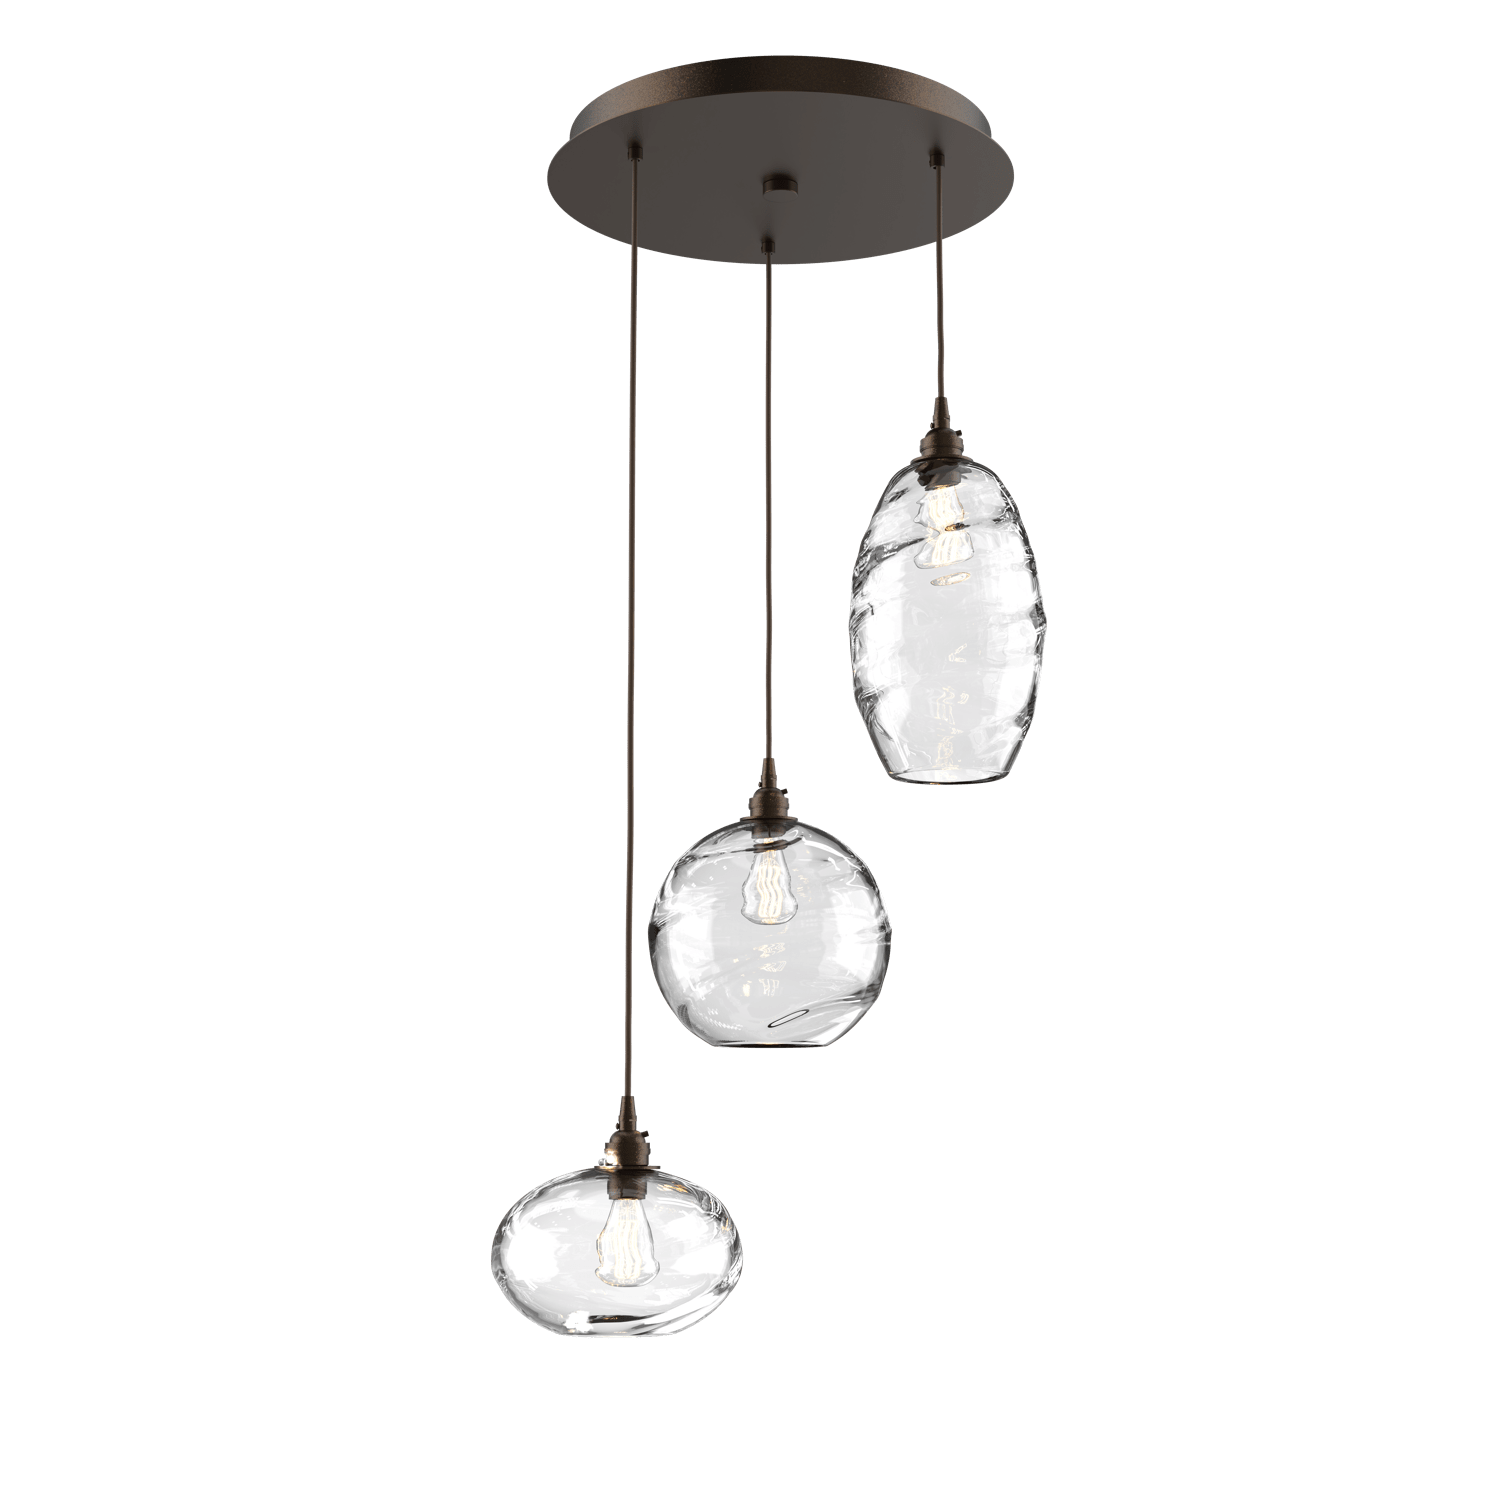 CHB0048-03-FB-OC-Hammerton-Studio-Optic-Blown-Glass-Misto-3-light-round-pendant-chandelier-with-flat-bronze-finish-and-optic-clear-blown-glass-shades-and-incandescent-lamping